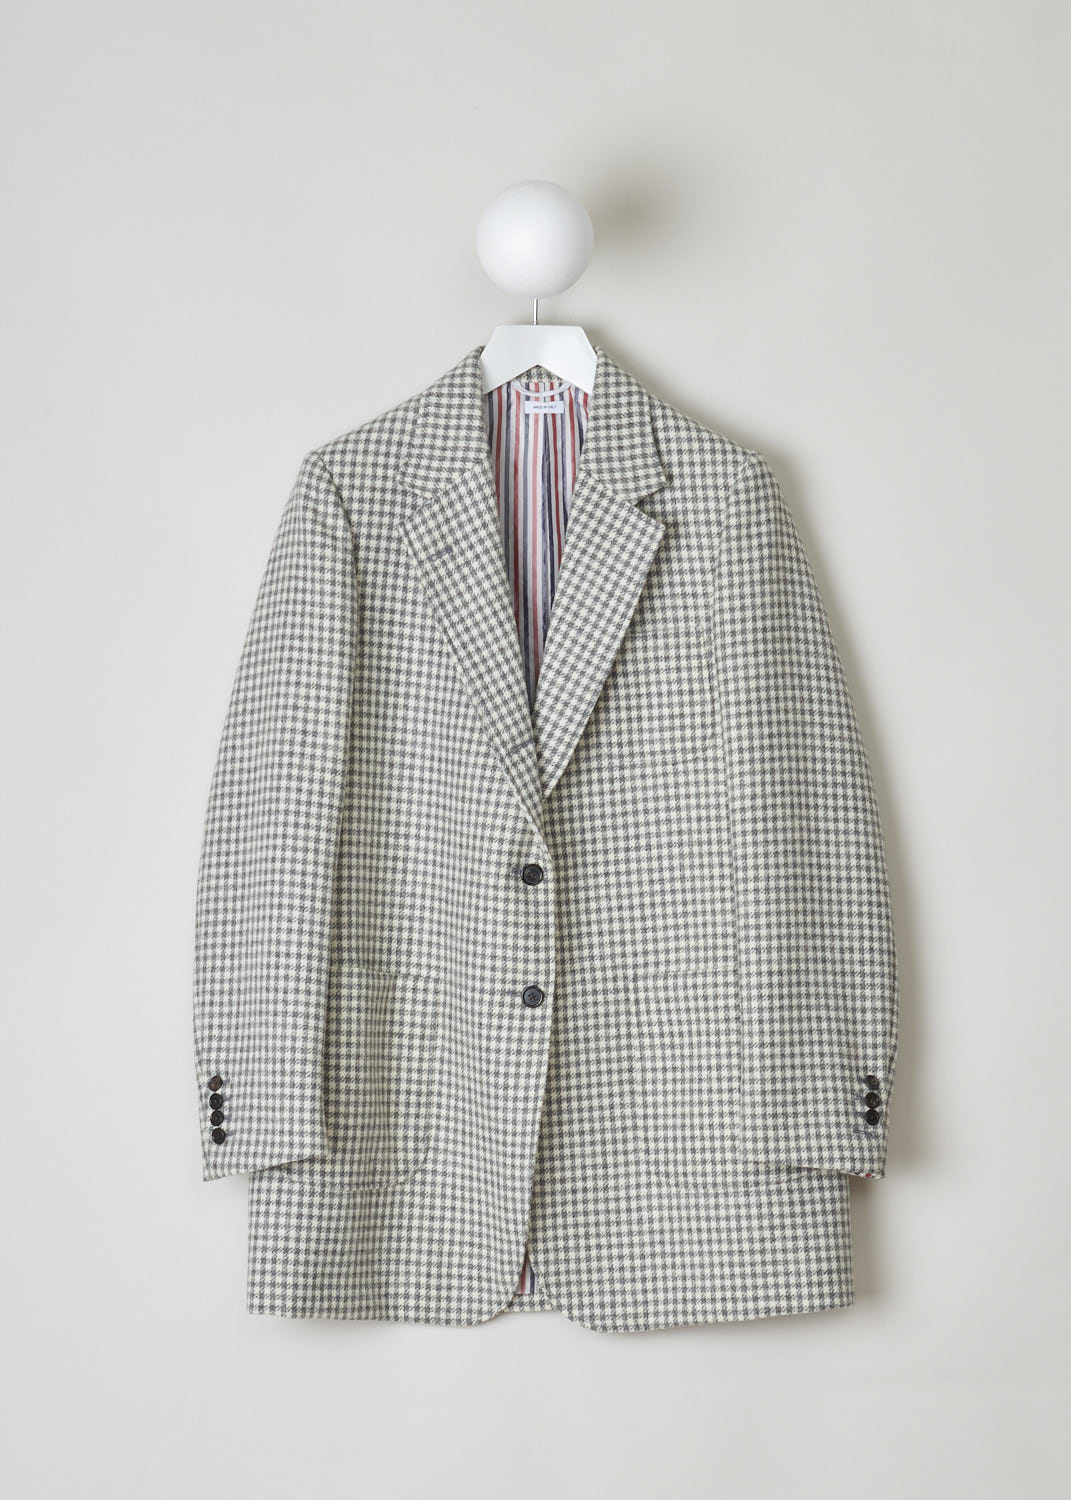 THOM BROWNE, OVERSIZED BLAZER IN HOUNDSTOOTH, FBC500A_06842_035_MED_GREY, Print, Front, Classic Houndstooth printed oversized blazer. This single breasted blazer features a notched lapel and a front button closure. The blazer has a single chest pocket, two patch pockets and three inner pockets. The long sleeves have buttoned cuffs. In the back, a centre slit can be found. 
